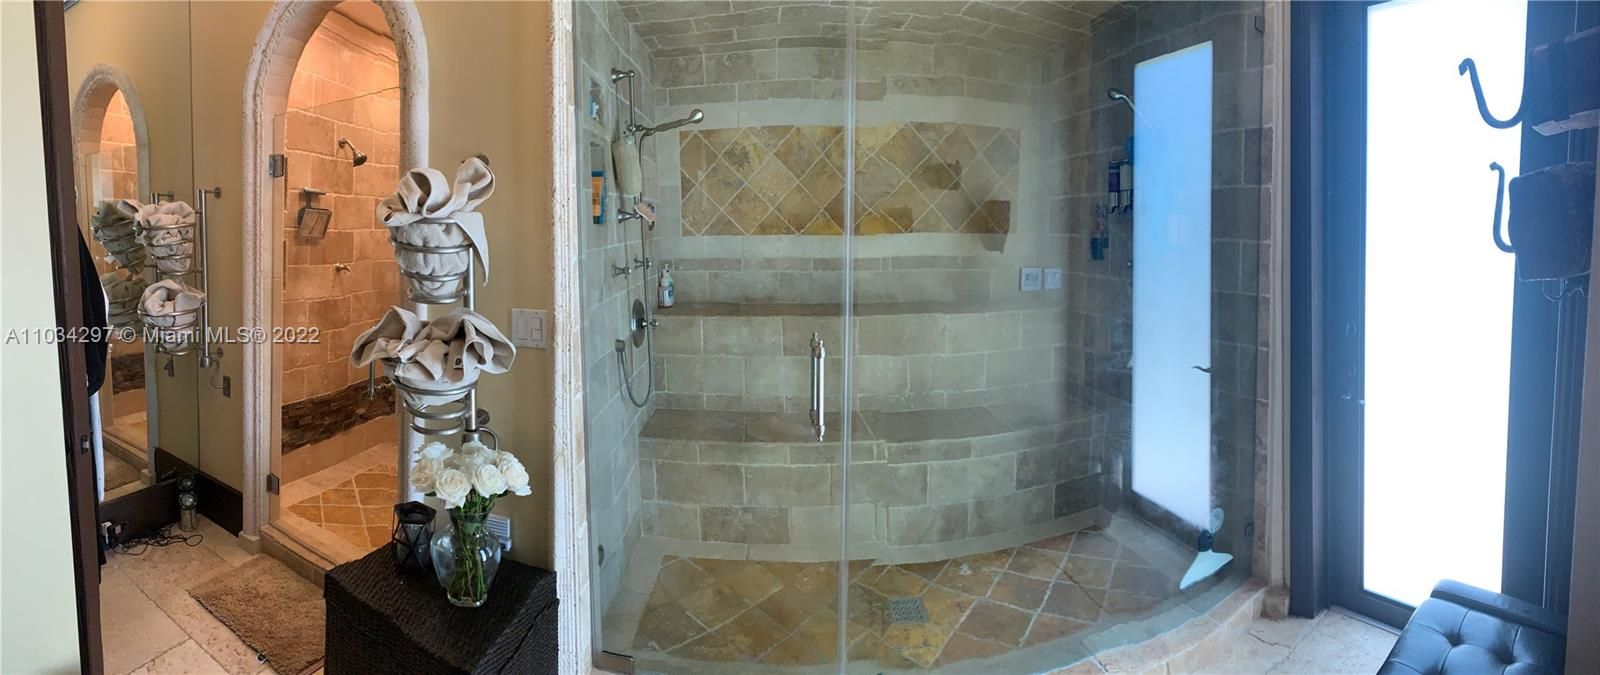 Cabana 4 head shower and adjacent Steam room with 3 shower heads